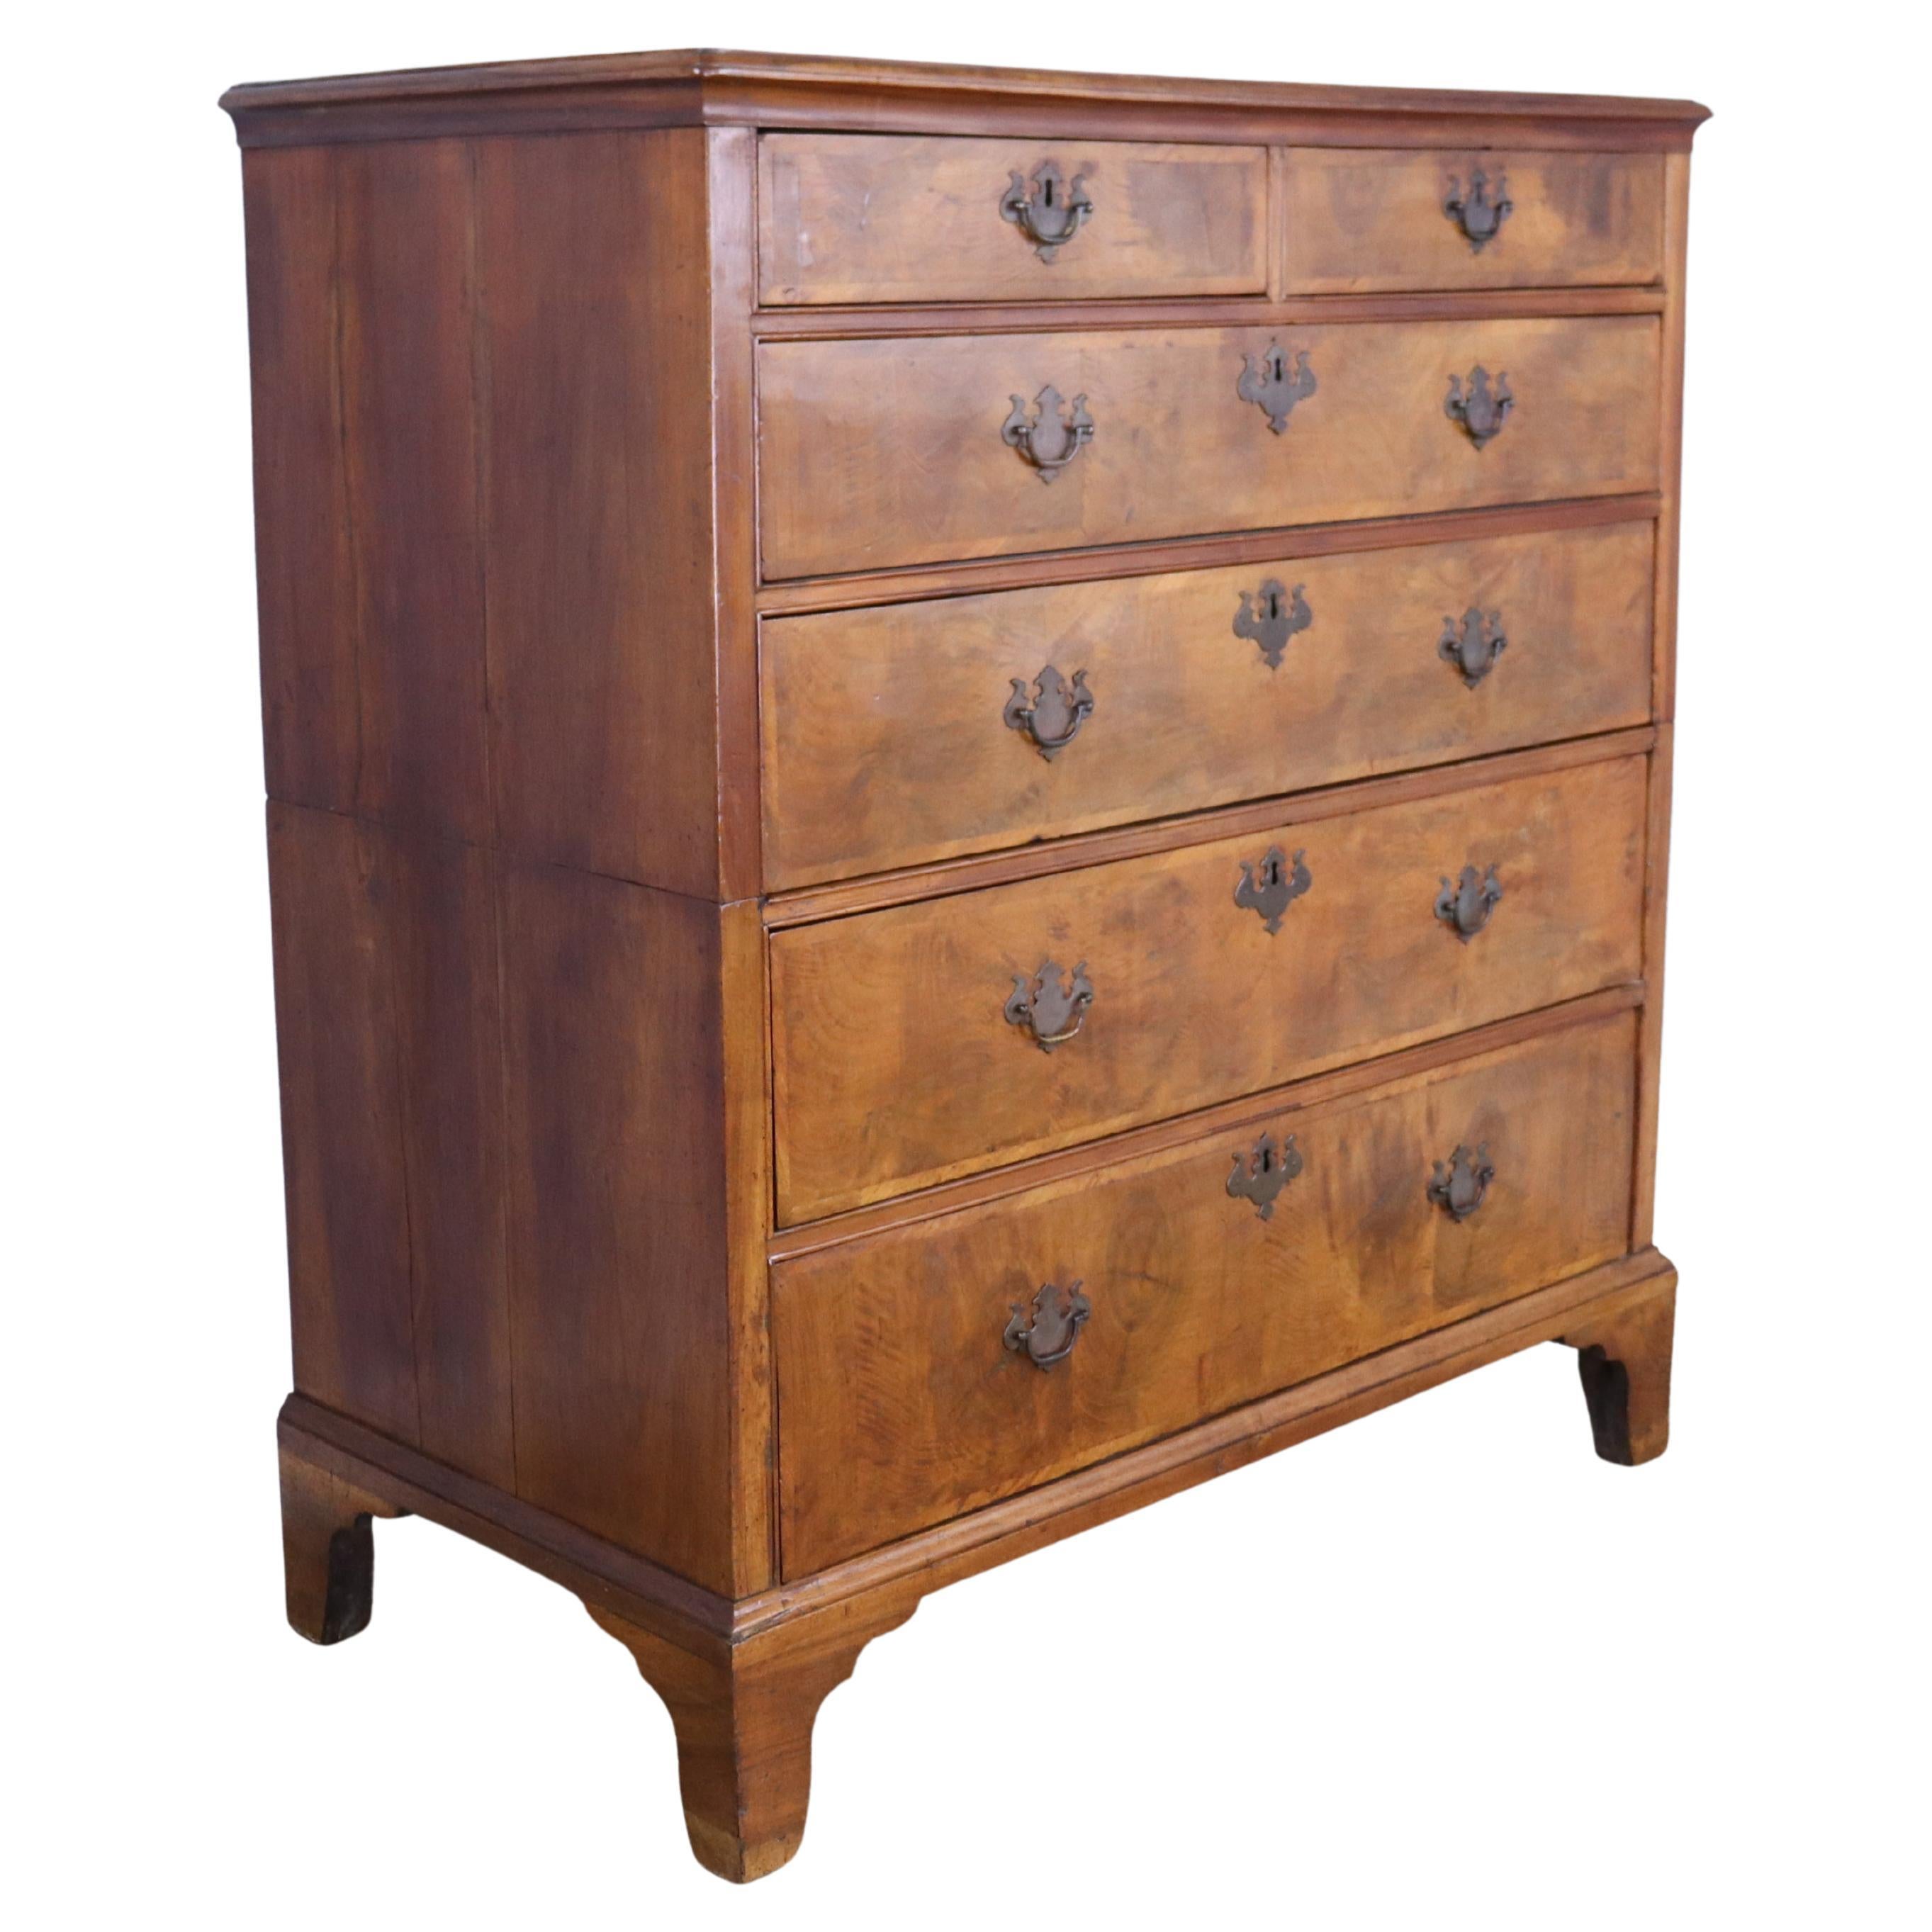 Early Georgian Burr Walnut 2 Over 4 Chest of Drawers, George I Period